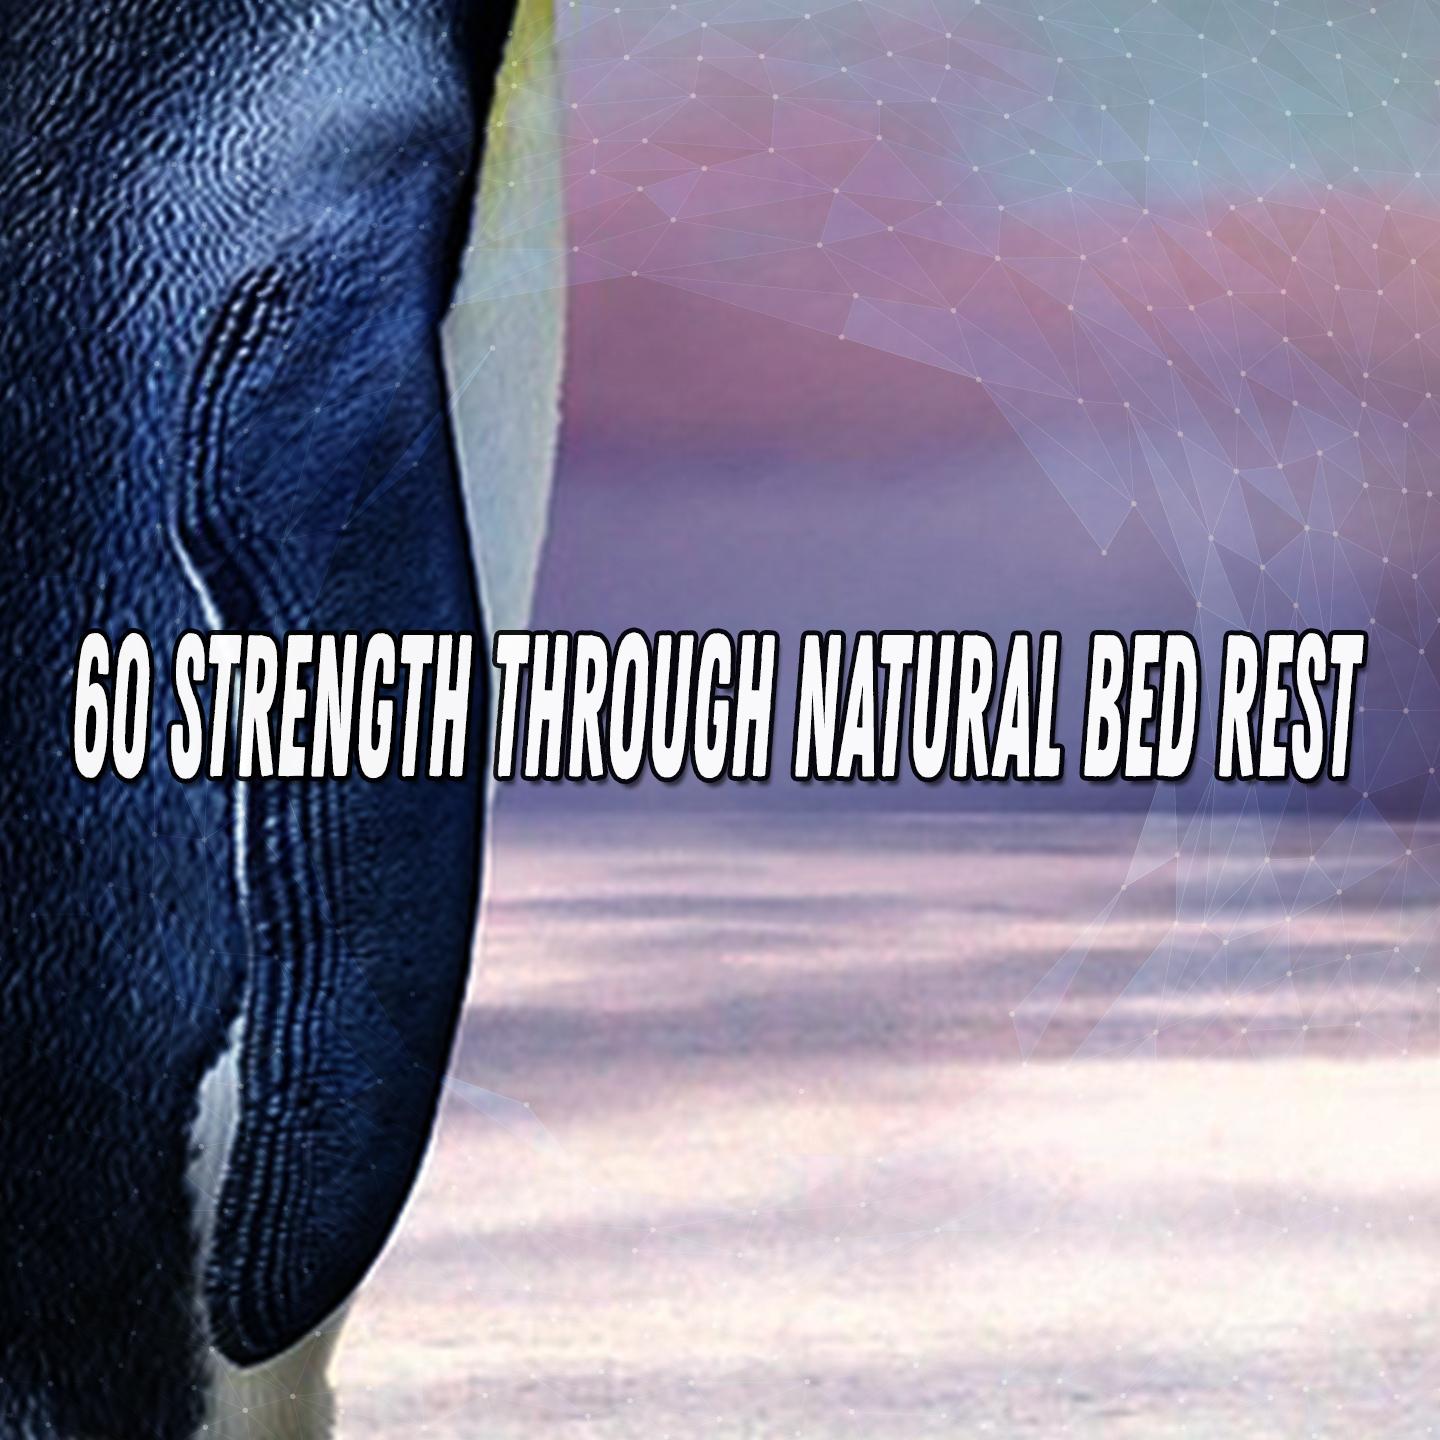 60 Strength Through Natural Bed Rest